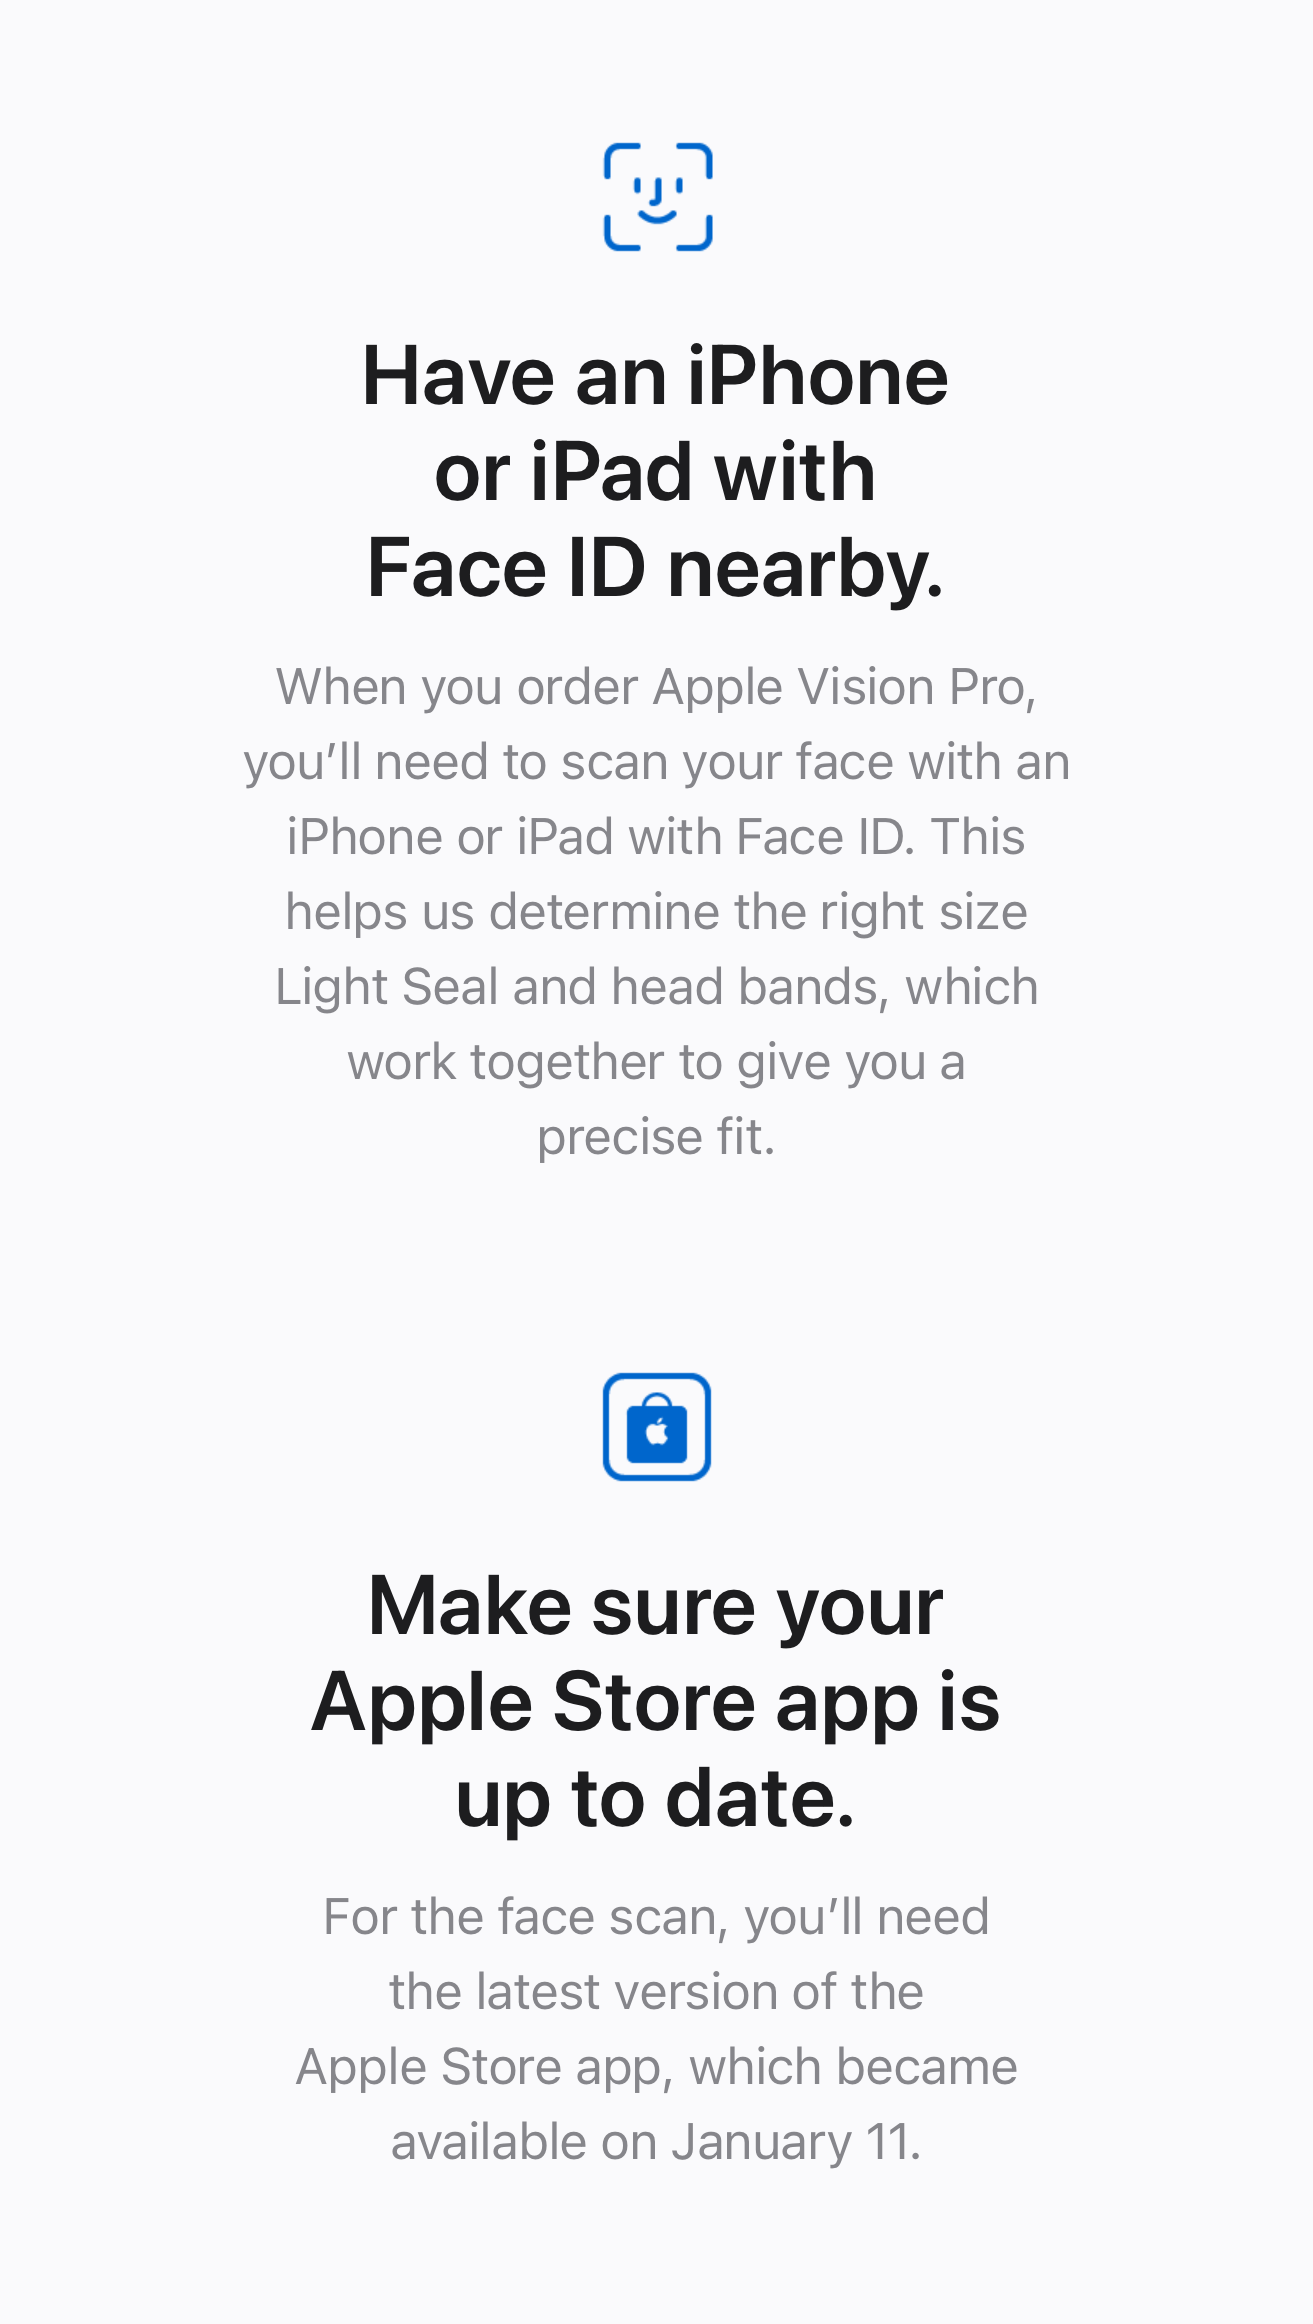 Apple Vision Pro Will Require A Face ID Scan To Order Online